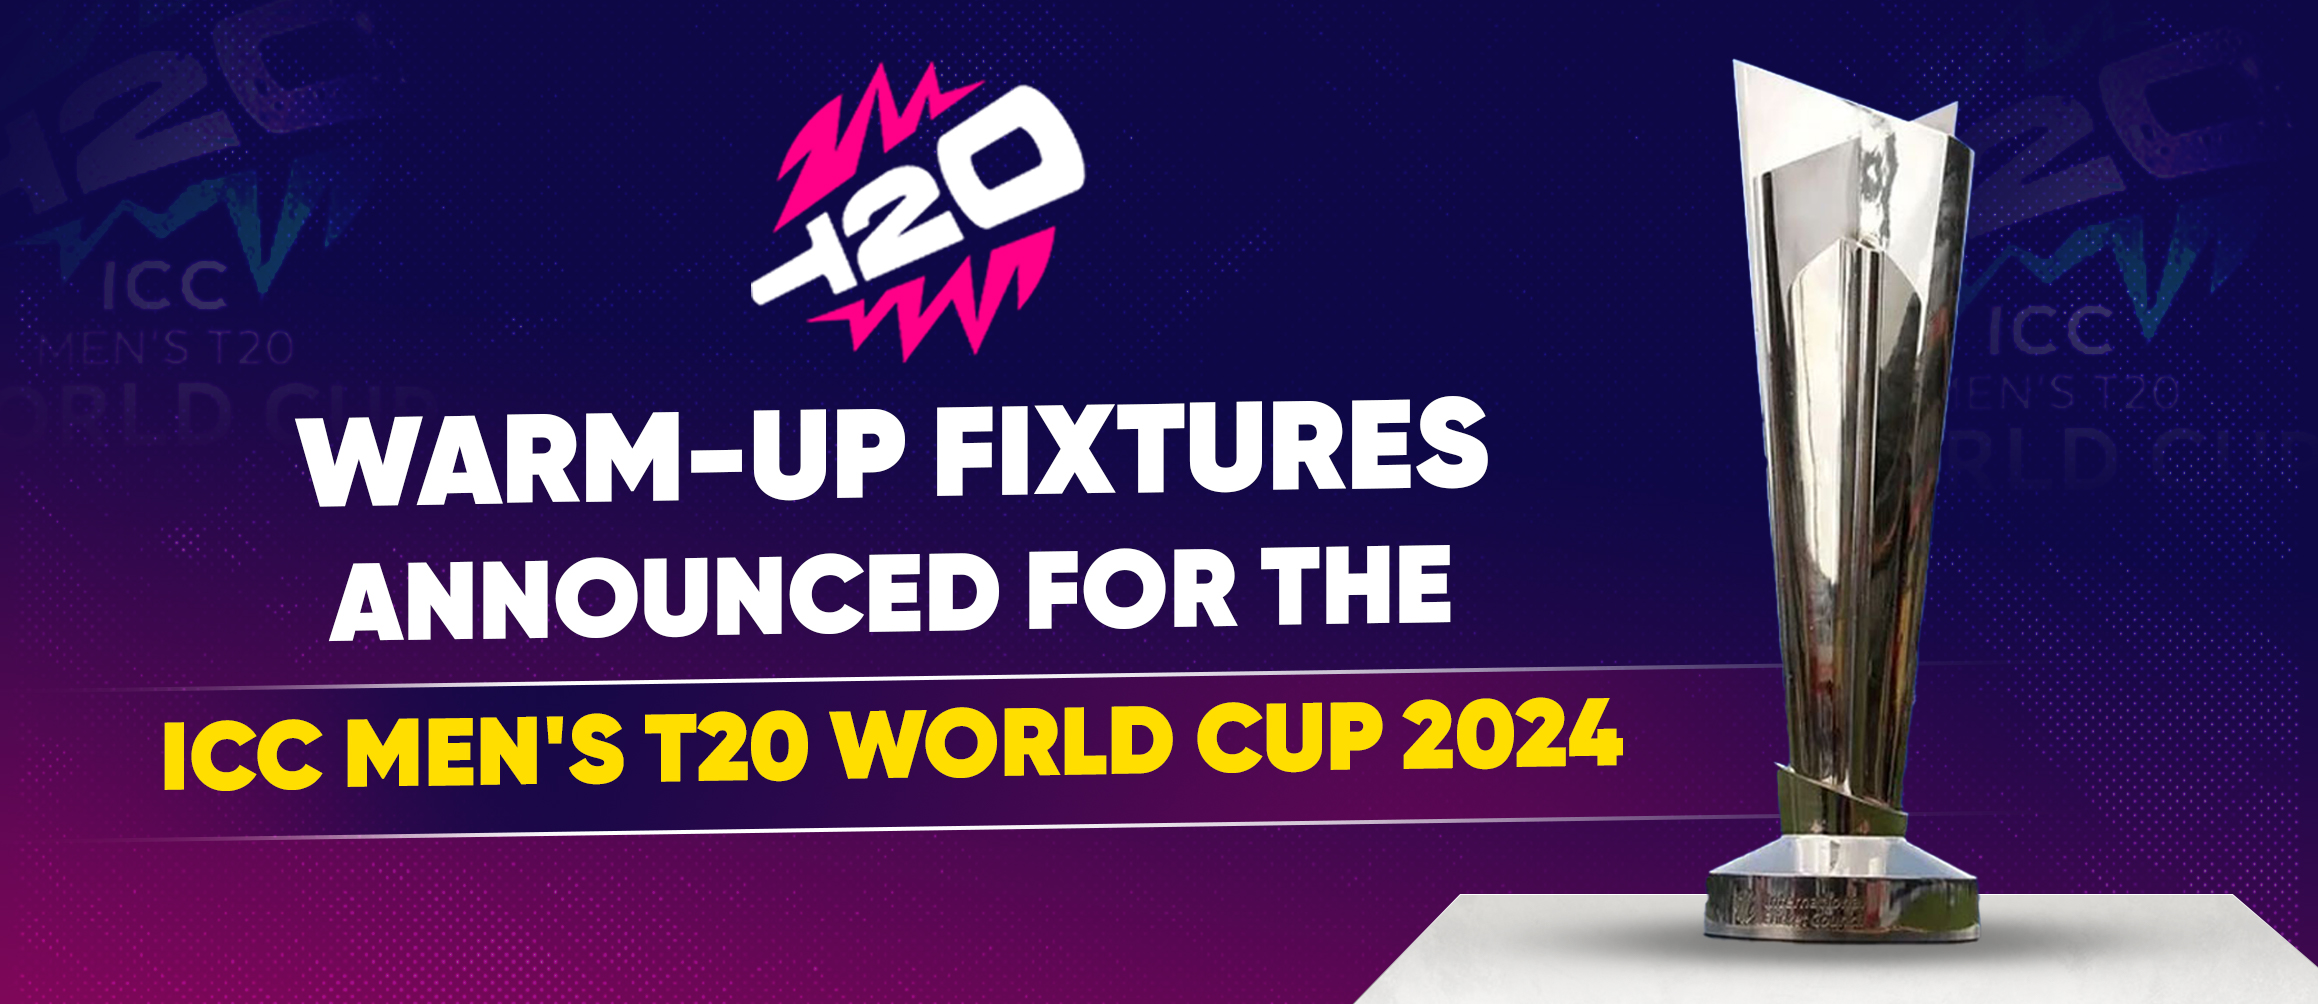 Warm-up fixtures announced for the ICC Men’s T20 World Cup 2024